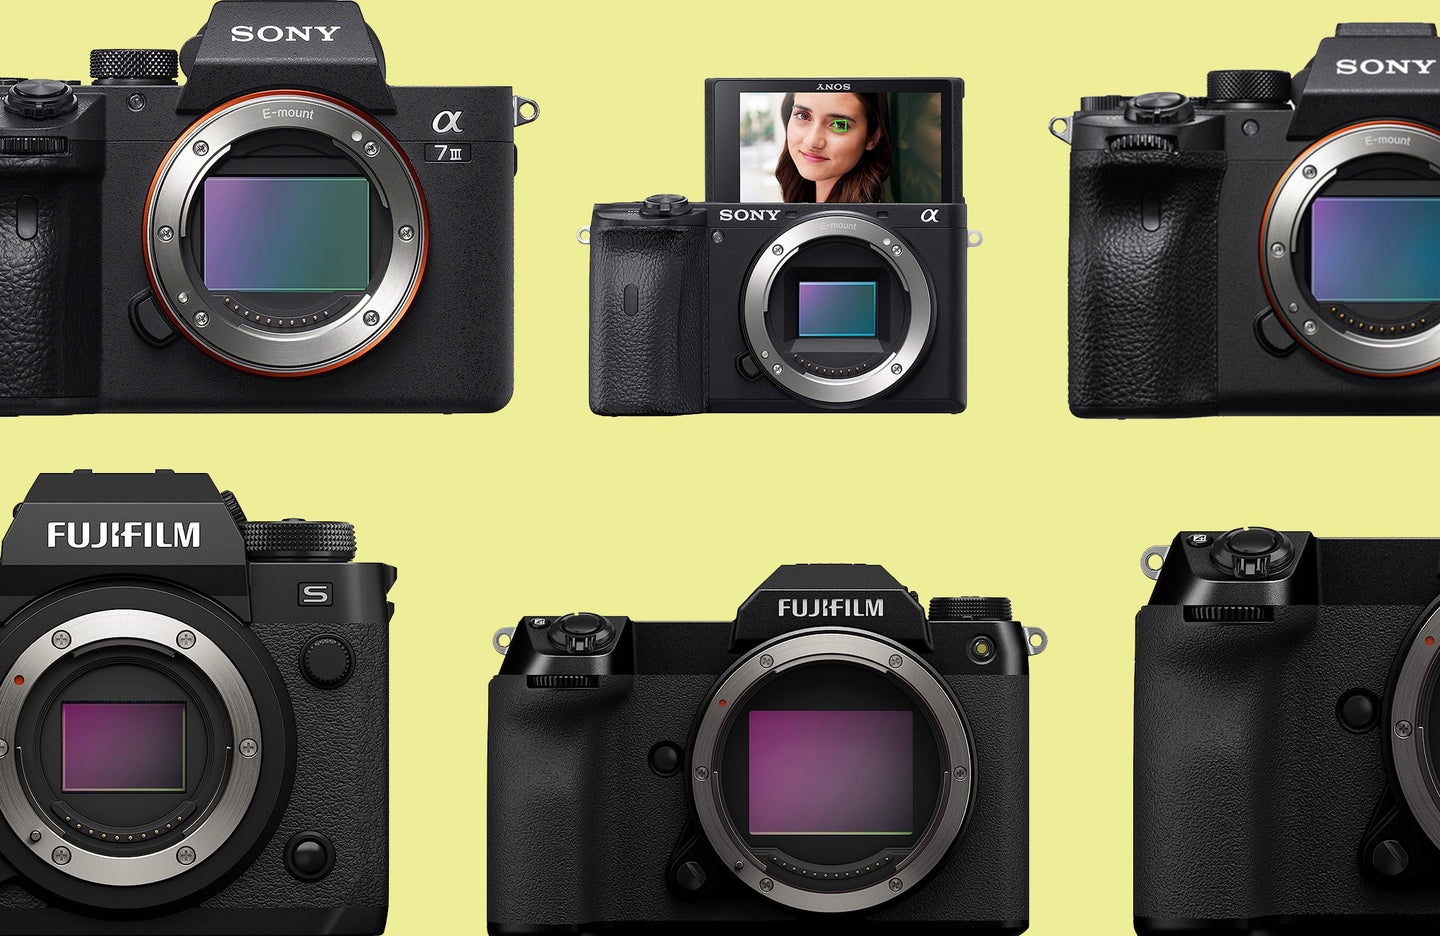 Fujifilm and Sony cameras against a yellow background